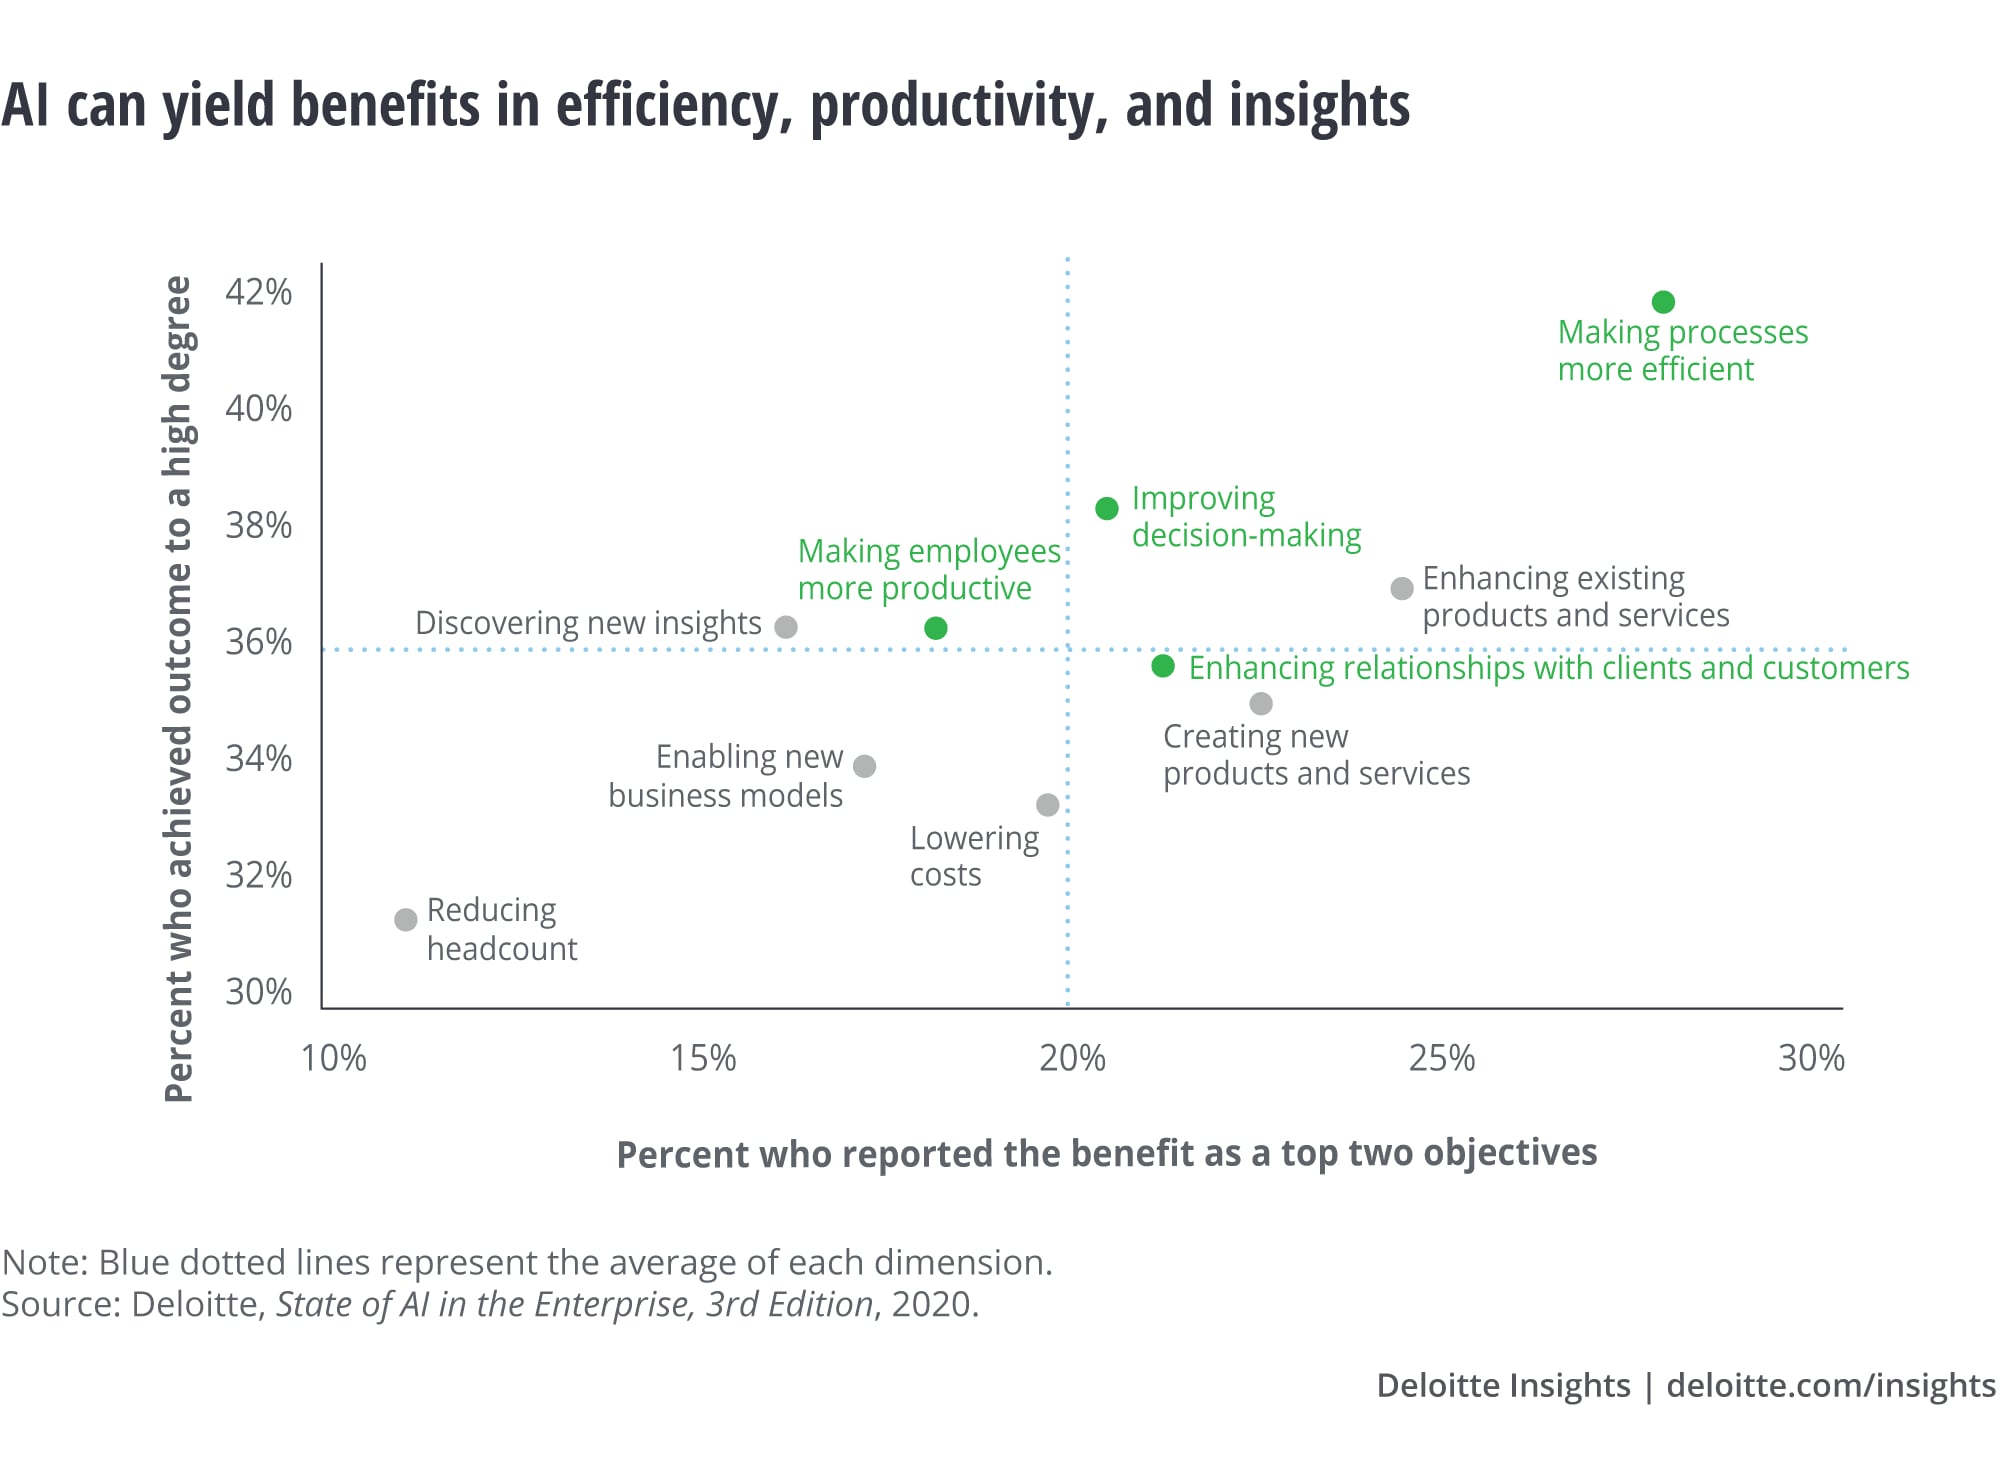 Process efficiency tops the list of benefits achieved with AI